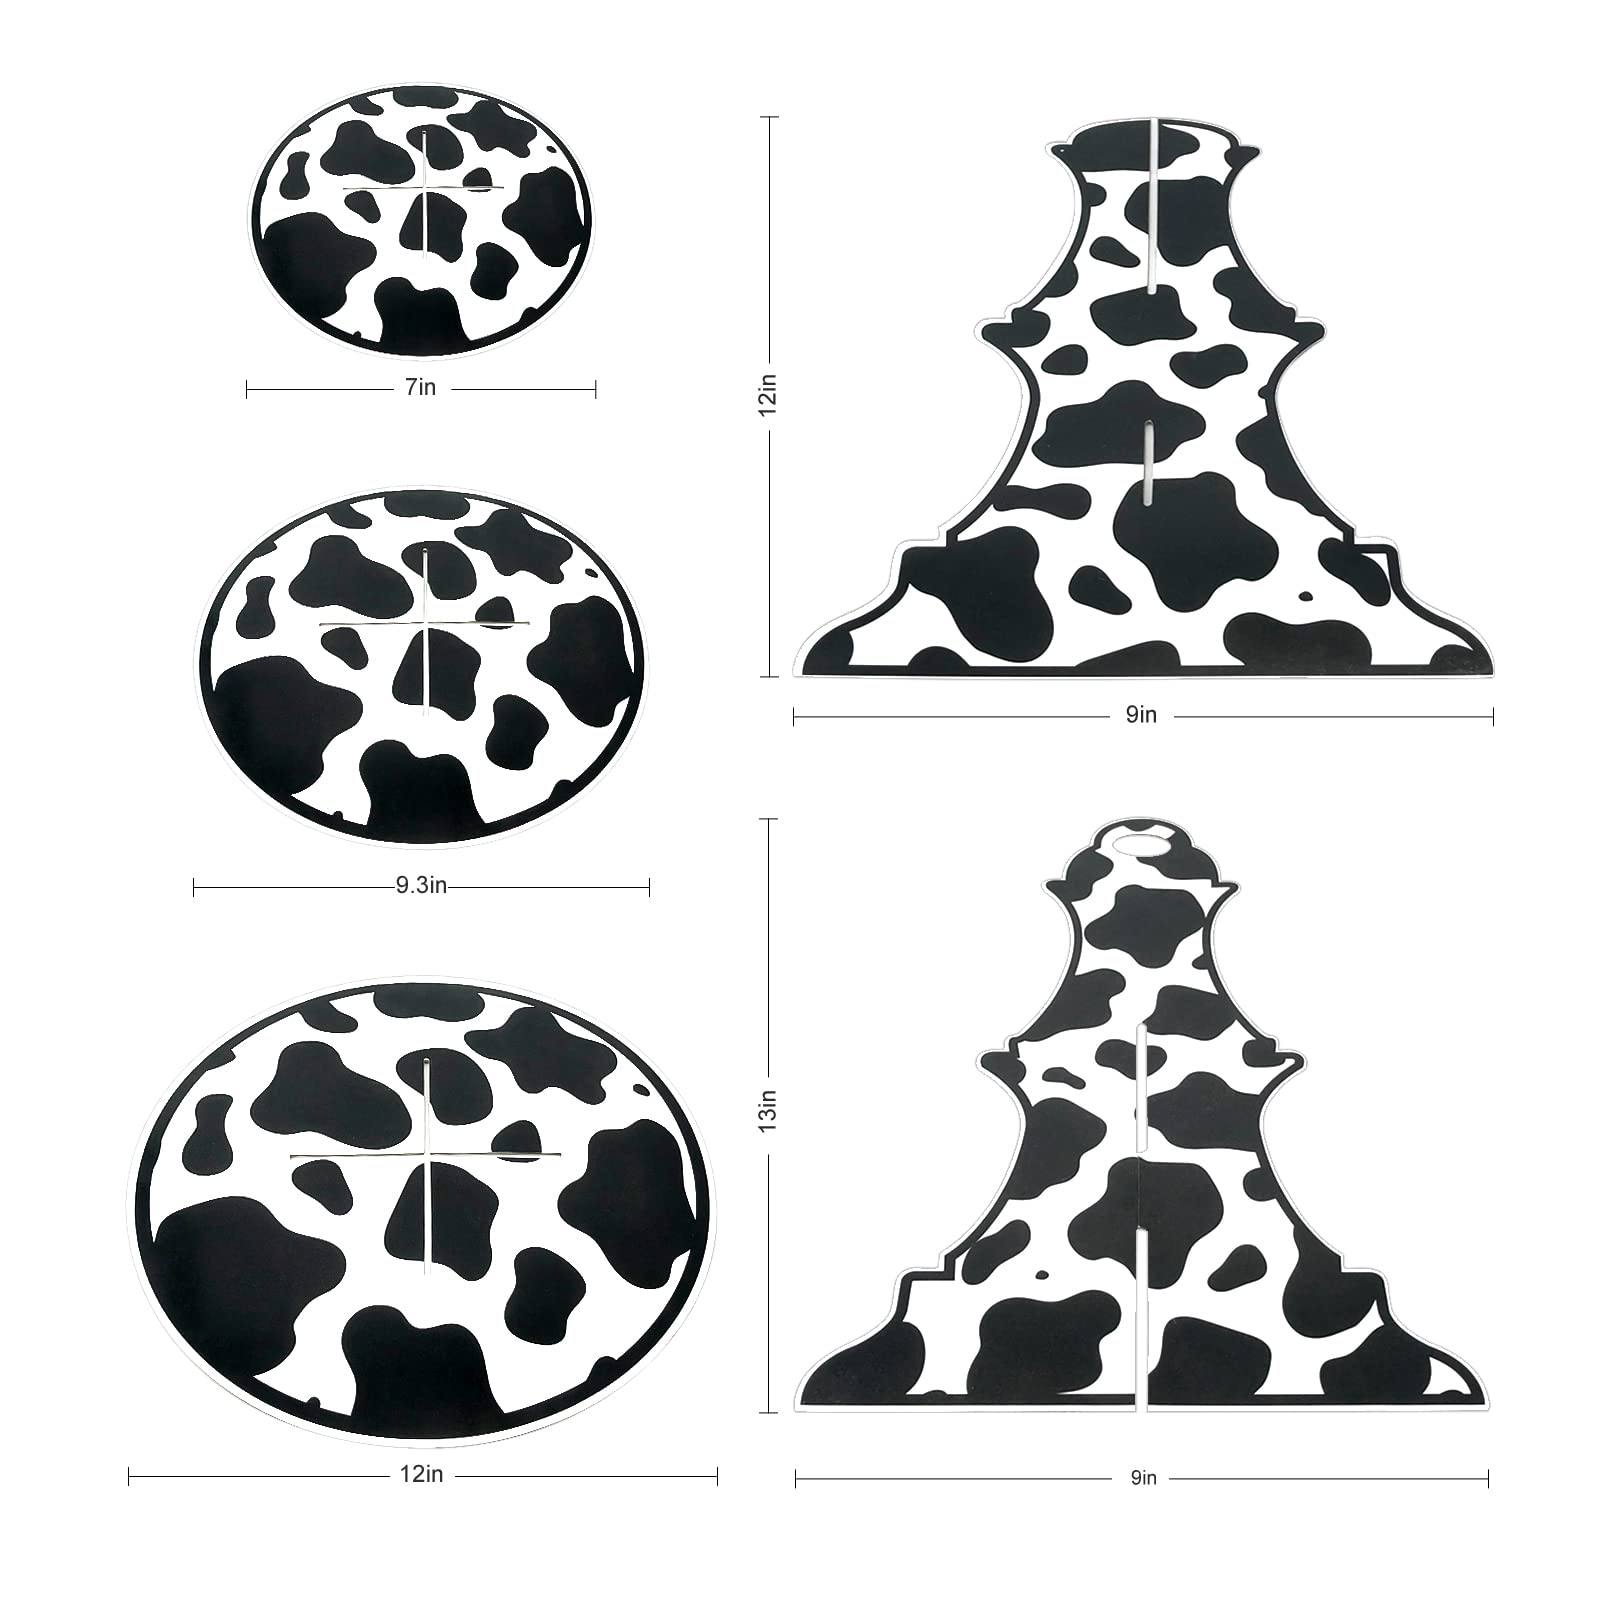 Cow Print Cardboard Cupcake Stand,3 Tier Farm Animal Cow Print Round Cupcake Holder Farm Cow Themed Party Decorations for Birthday Party Decorations Cow Party Supplies